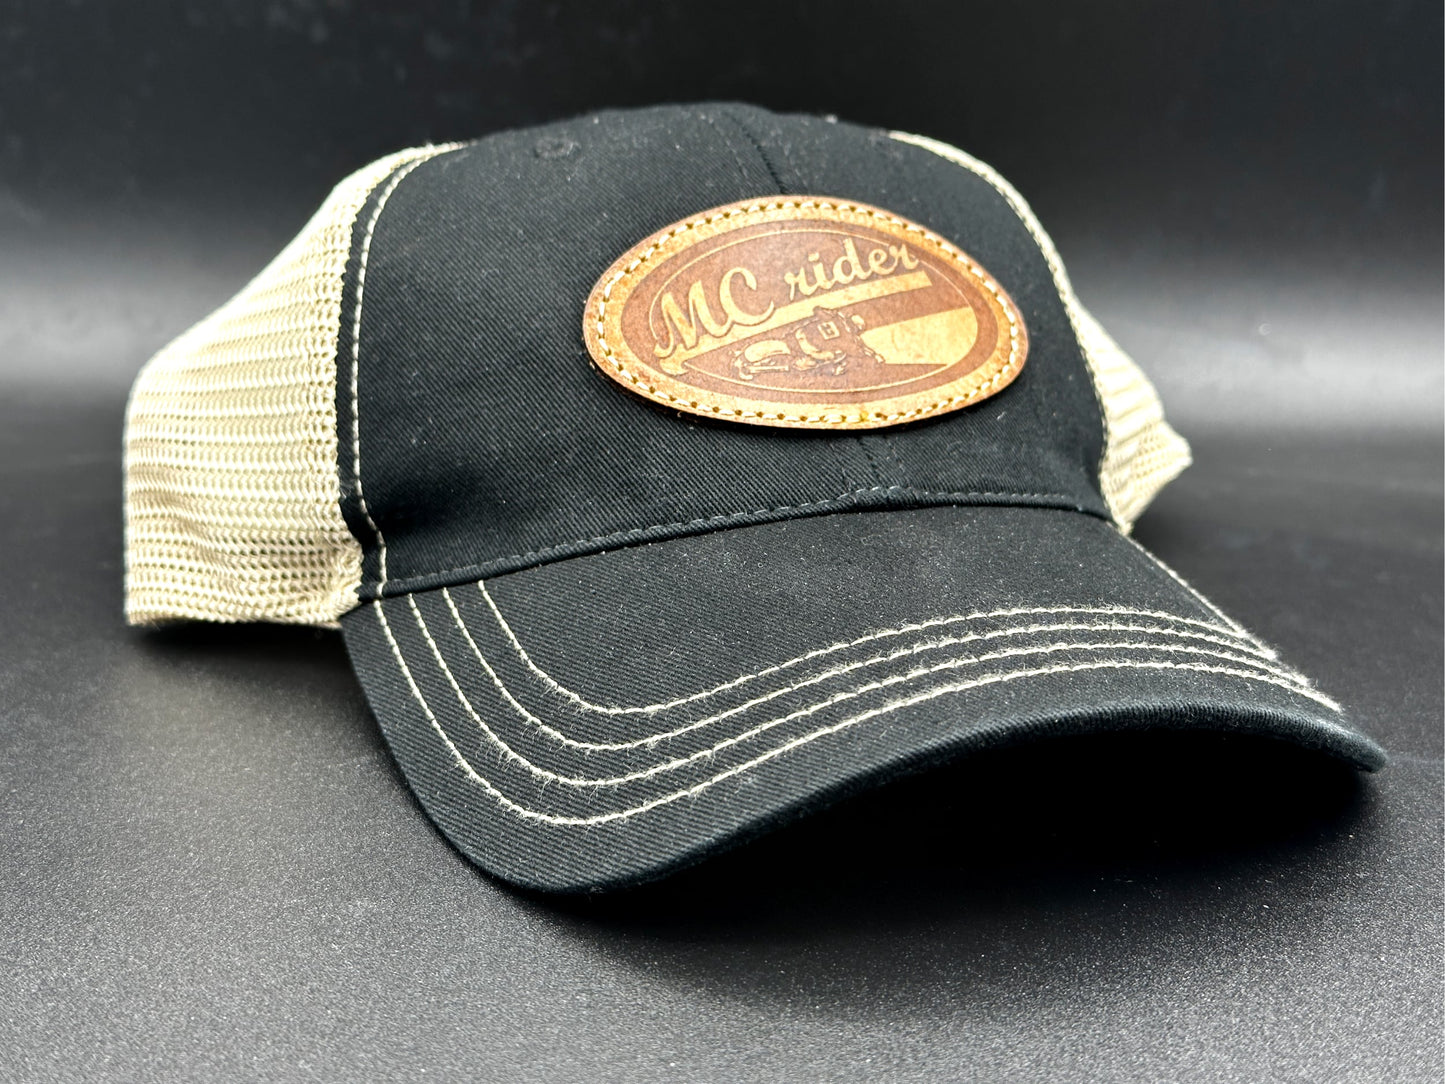 MCrider Hat: The same hat worn in the weekly videos.